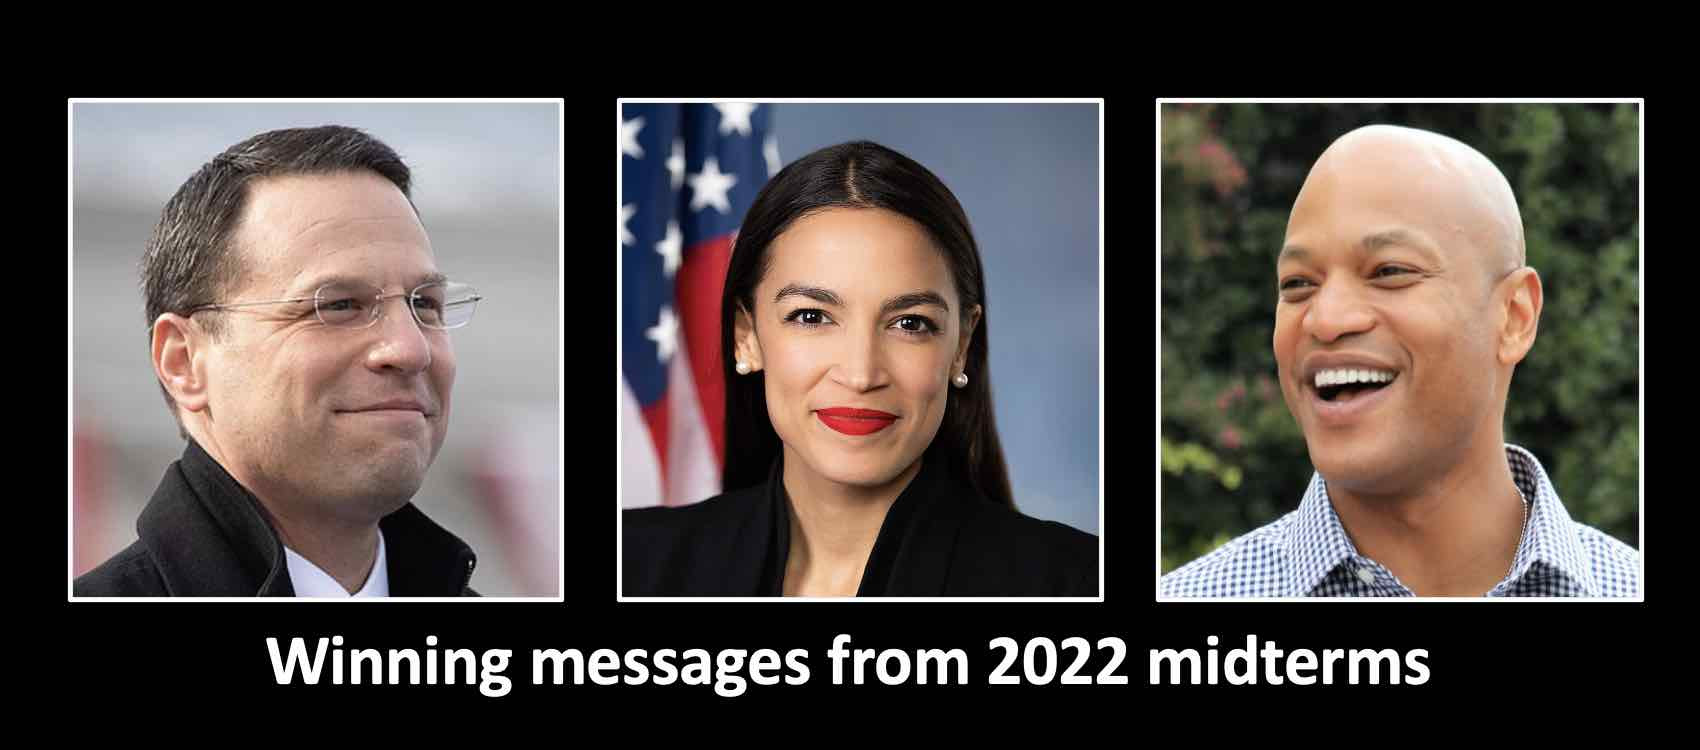 Winning messages from 2022 midterms